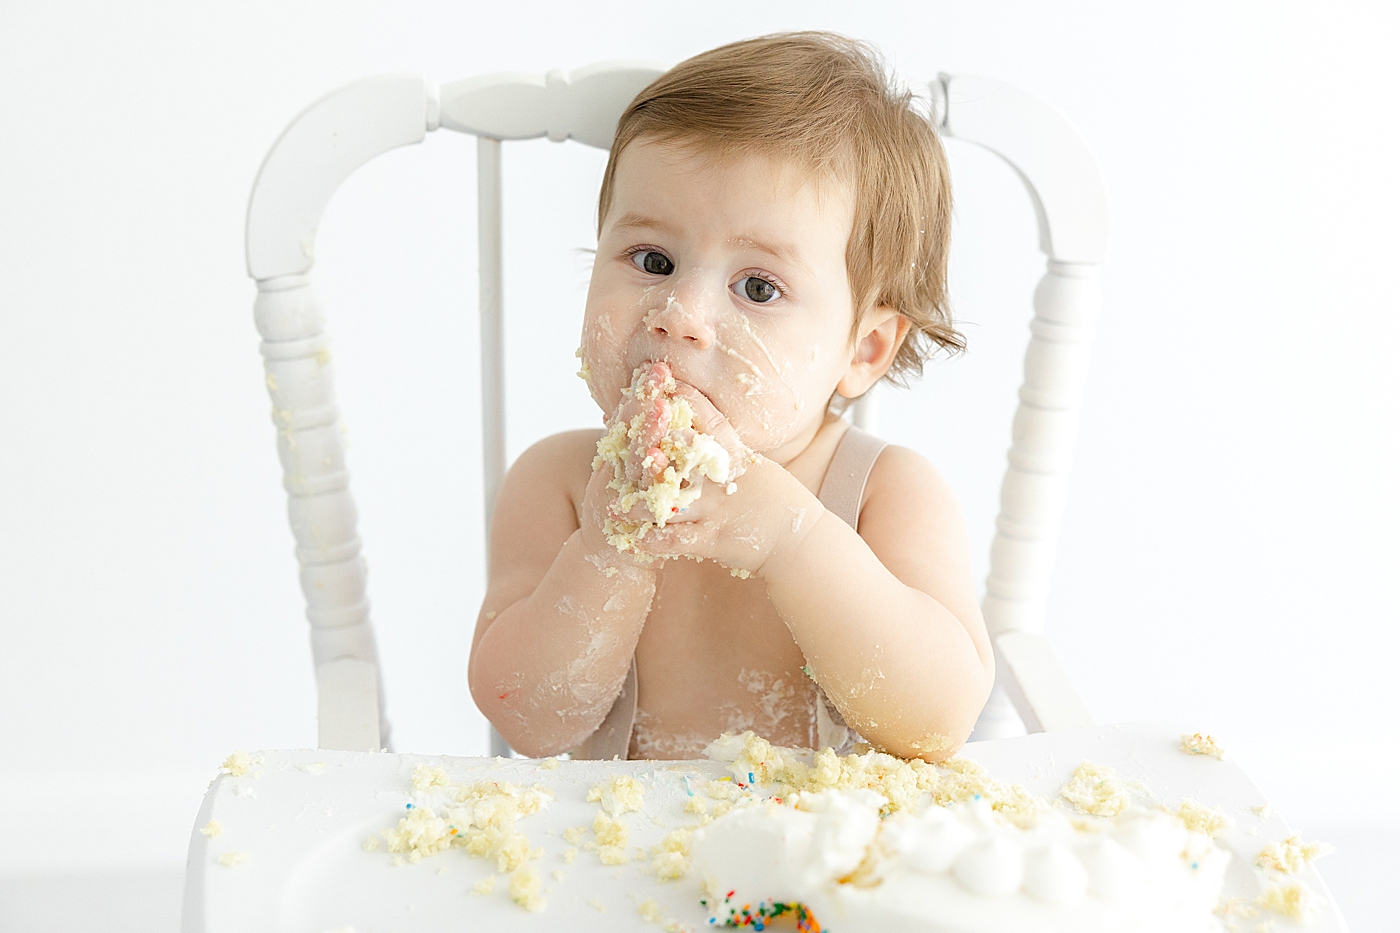 Baby boy eating cake in a white highchair | Image by Sana Ahmed